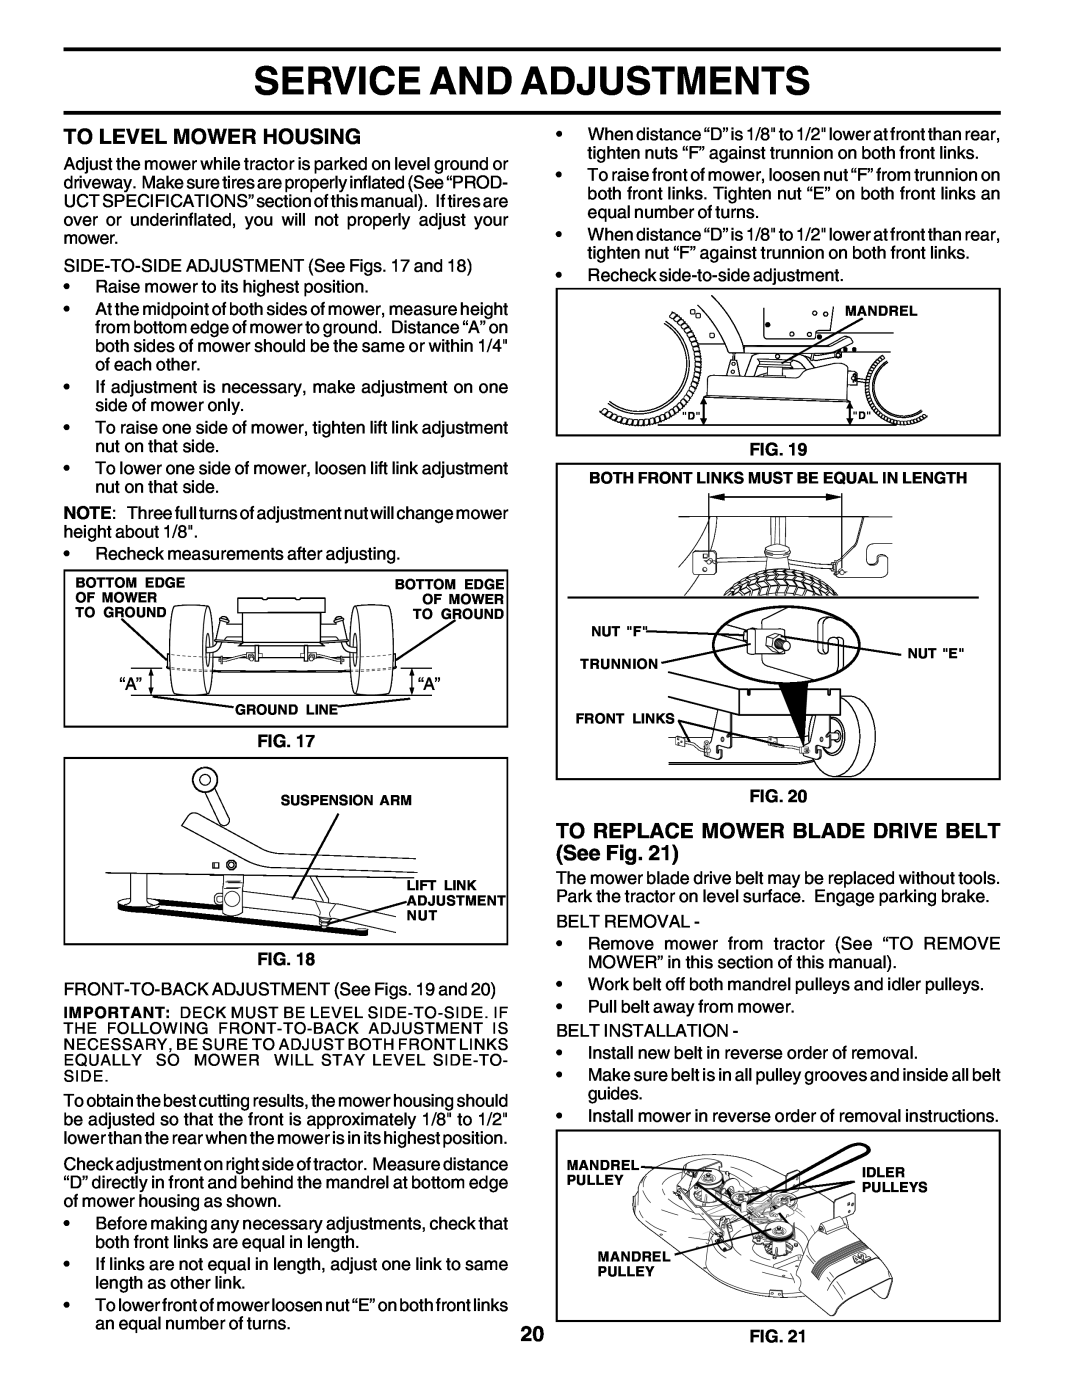 Poulan PO14542C manual Service And Adjustments, To Level Mower Housing, TO REPLACE MOWER BLADE DRIVE BELT See Fig 